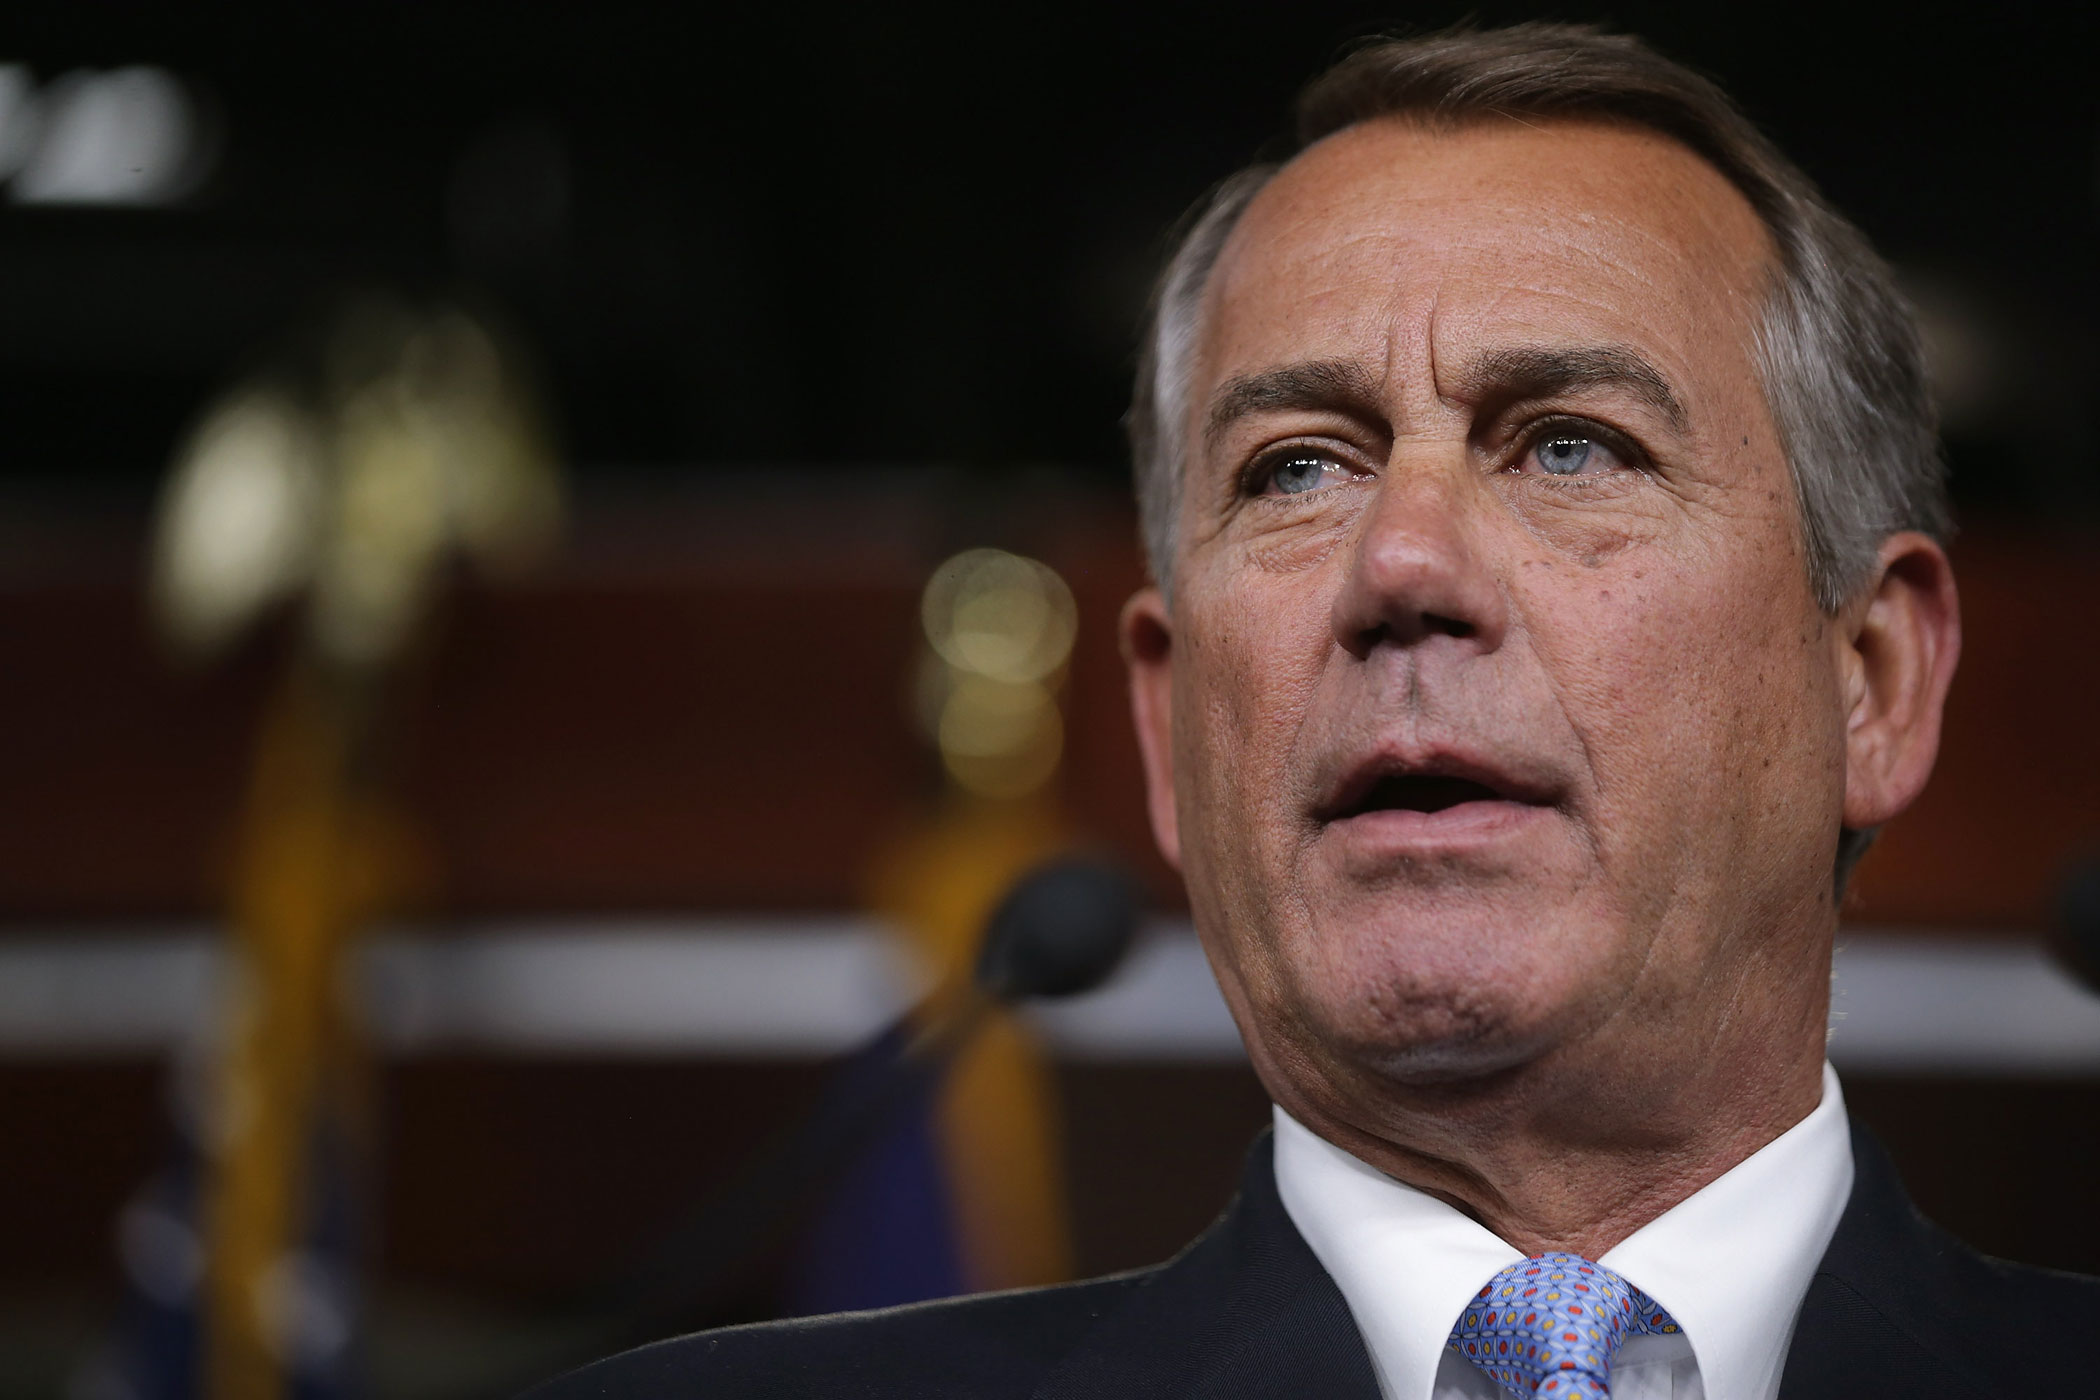 Speaker of the House John Boehner holds his weekly news conference at the U.S. Capitol on Feb. 5, 2015 in Washington, DC. (Chip Somodevilla—Getty Images)